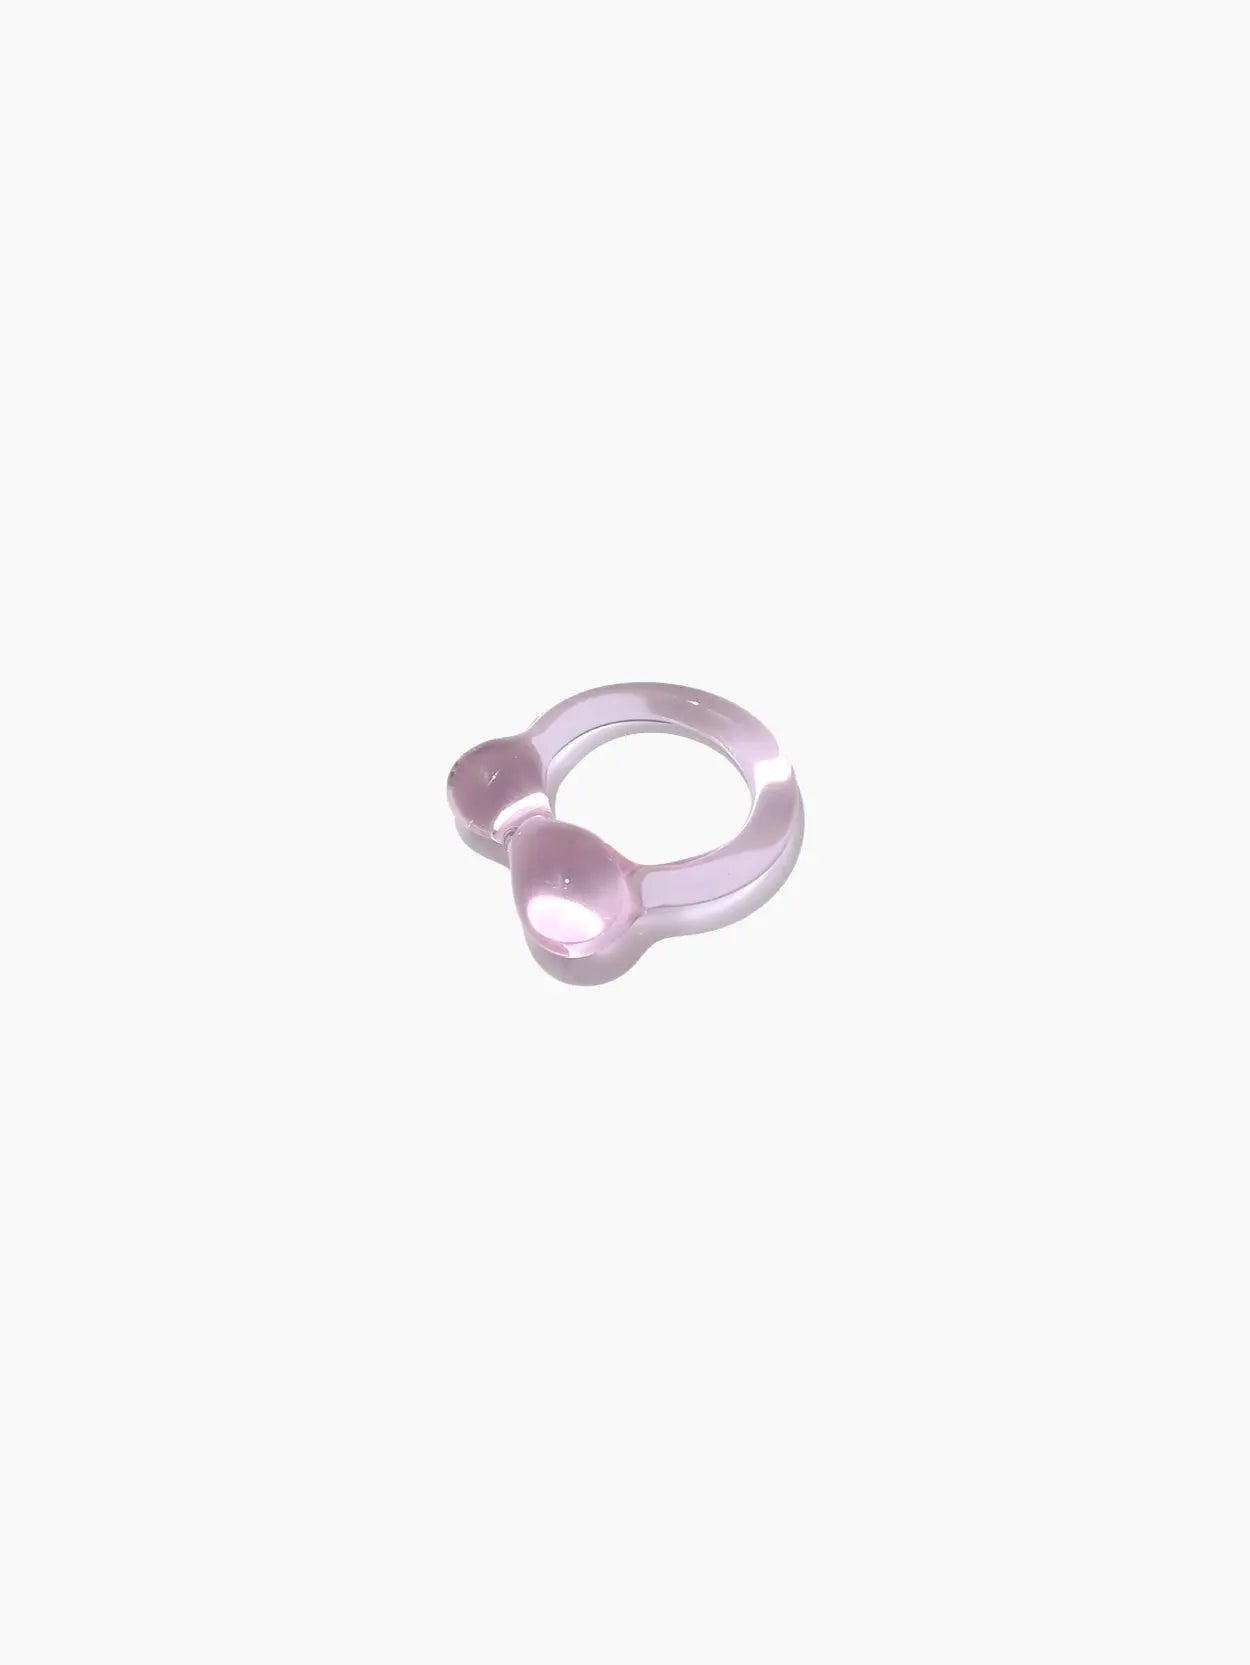 A pink ring-shaped baby teether with two round, textured ends designed for soothing a baby's gums during teething. Made of soft, rubber-like material, this essential item is the Caju Ring Rose by Nathalie Schreckenberg and is available at Bassalstore in Barcelona.